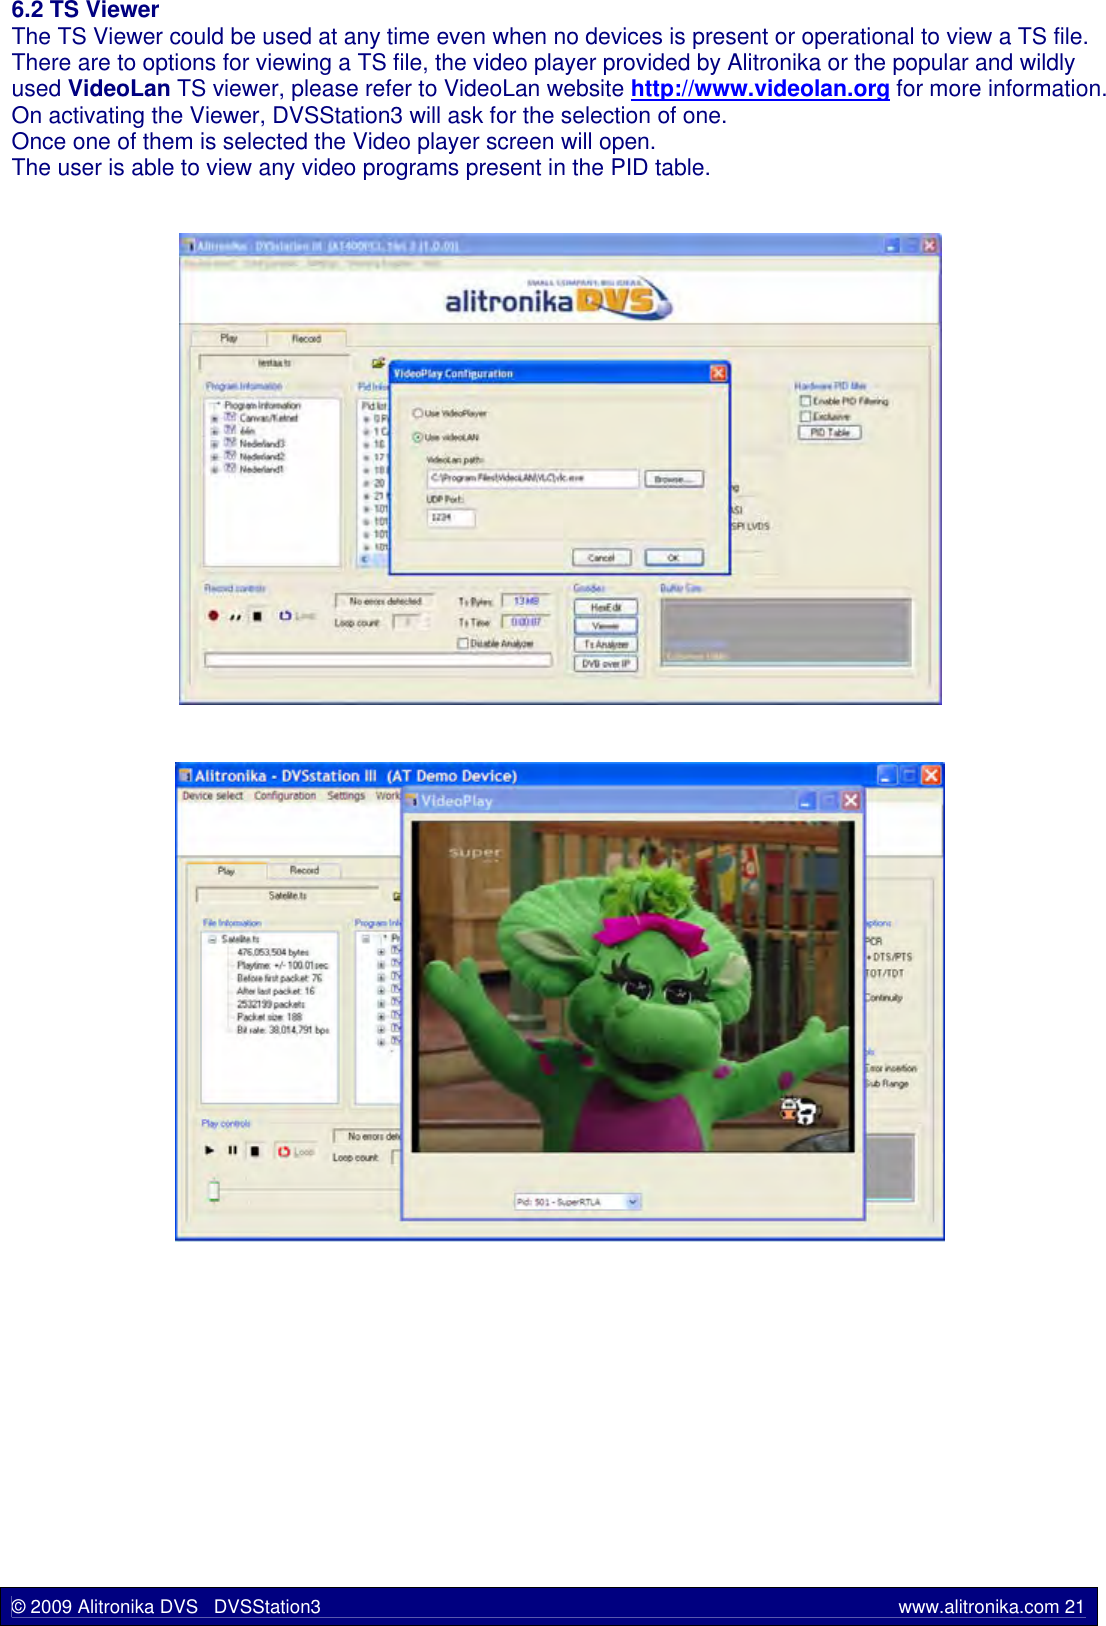 6.2 TS ViewerThe TS Viewer could be used at any time even when no devices is present or operational to view a TS file.There are to options for viewing a TS file, the video player provided by Alitronika or the popular and wildly used VideoLan TS viewer, please refer to VideoLan website http://www.videolan.org for more information. On activating the Viewer, DVSStation3 will ask for the selection of one.Once one of them is selected the Video player screen will open.The user is able to view any video programs present in the PID table.© 2009 Alitronika DVS   DVSStation3 www.alitronika.com 21